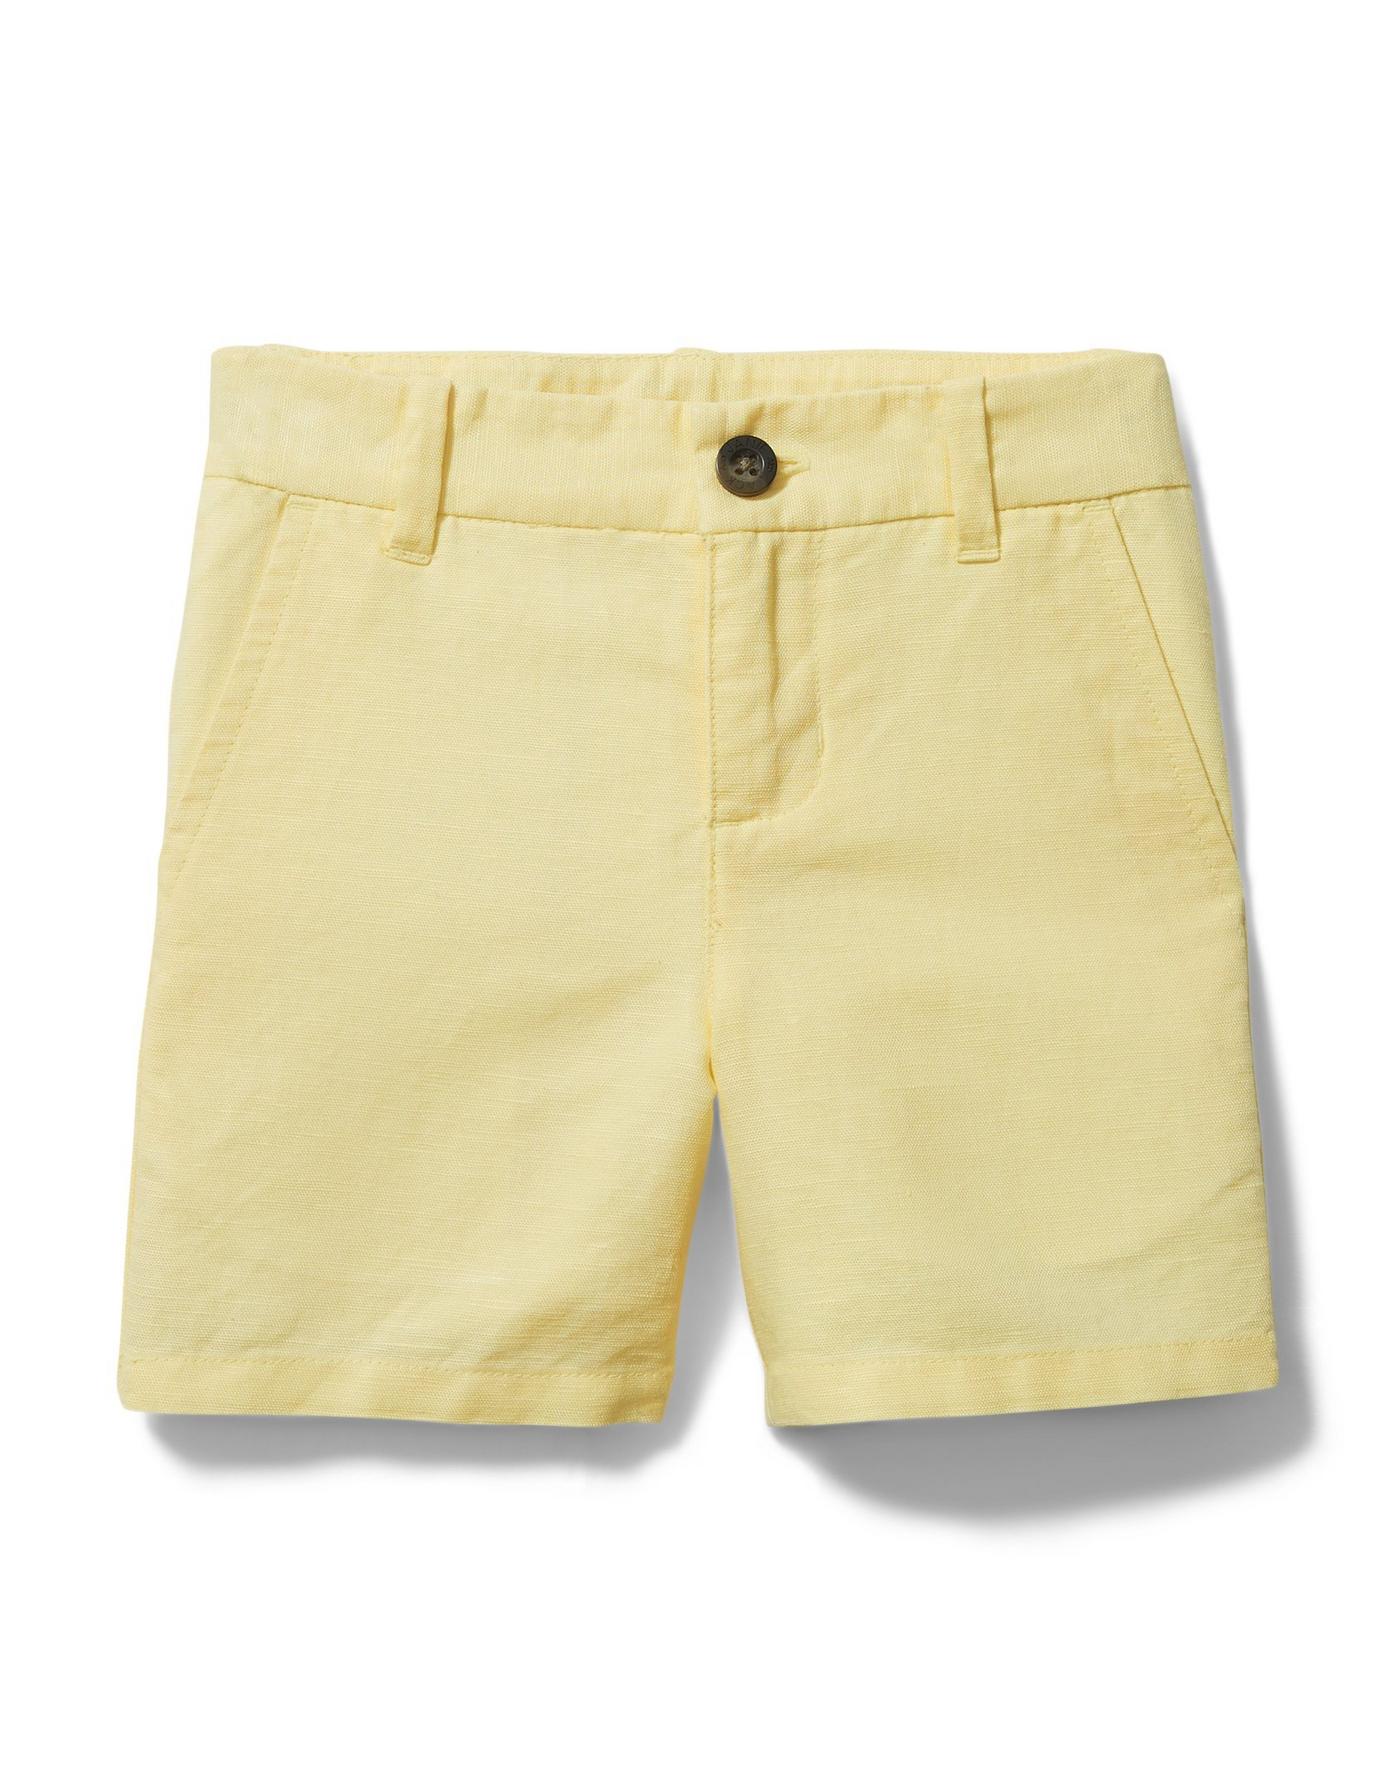 sibling matches for summer, yellow linen shorts